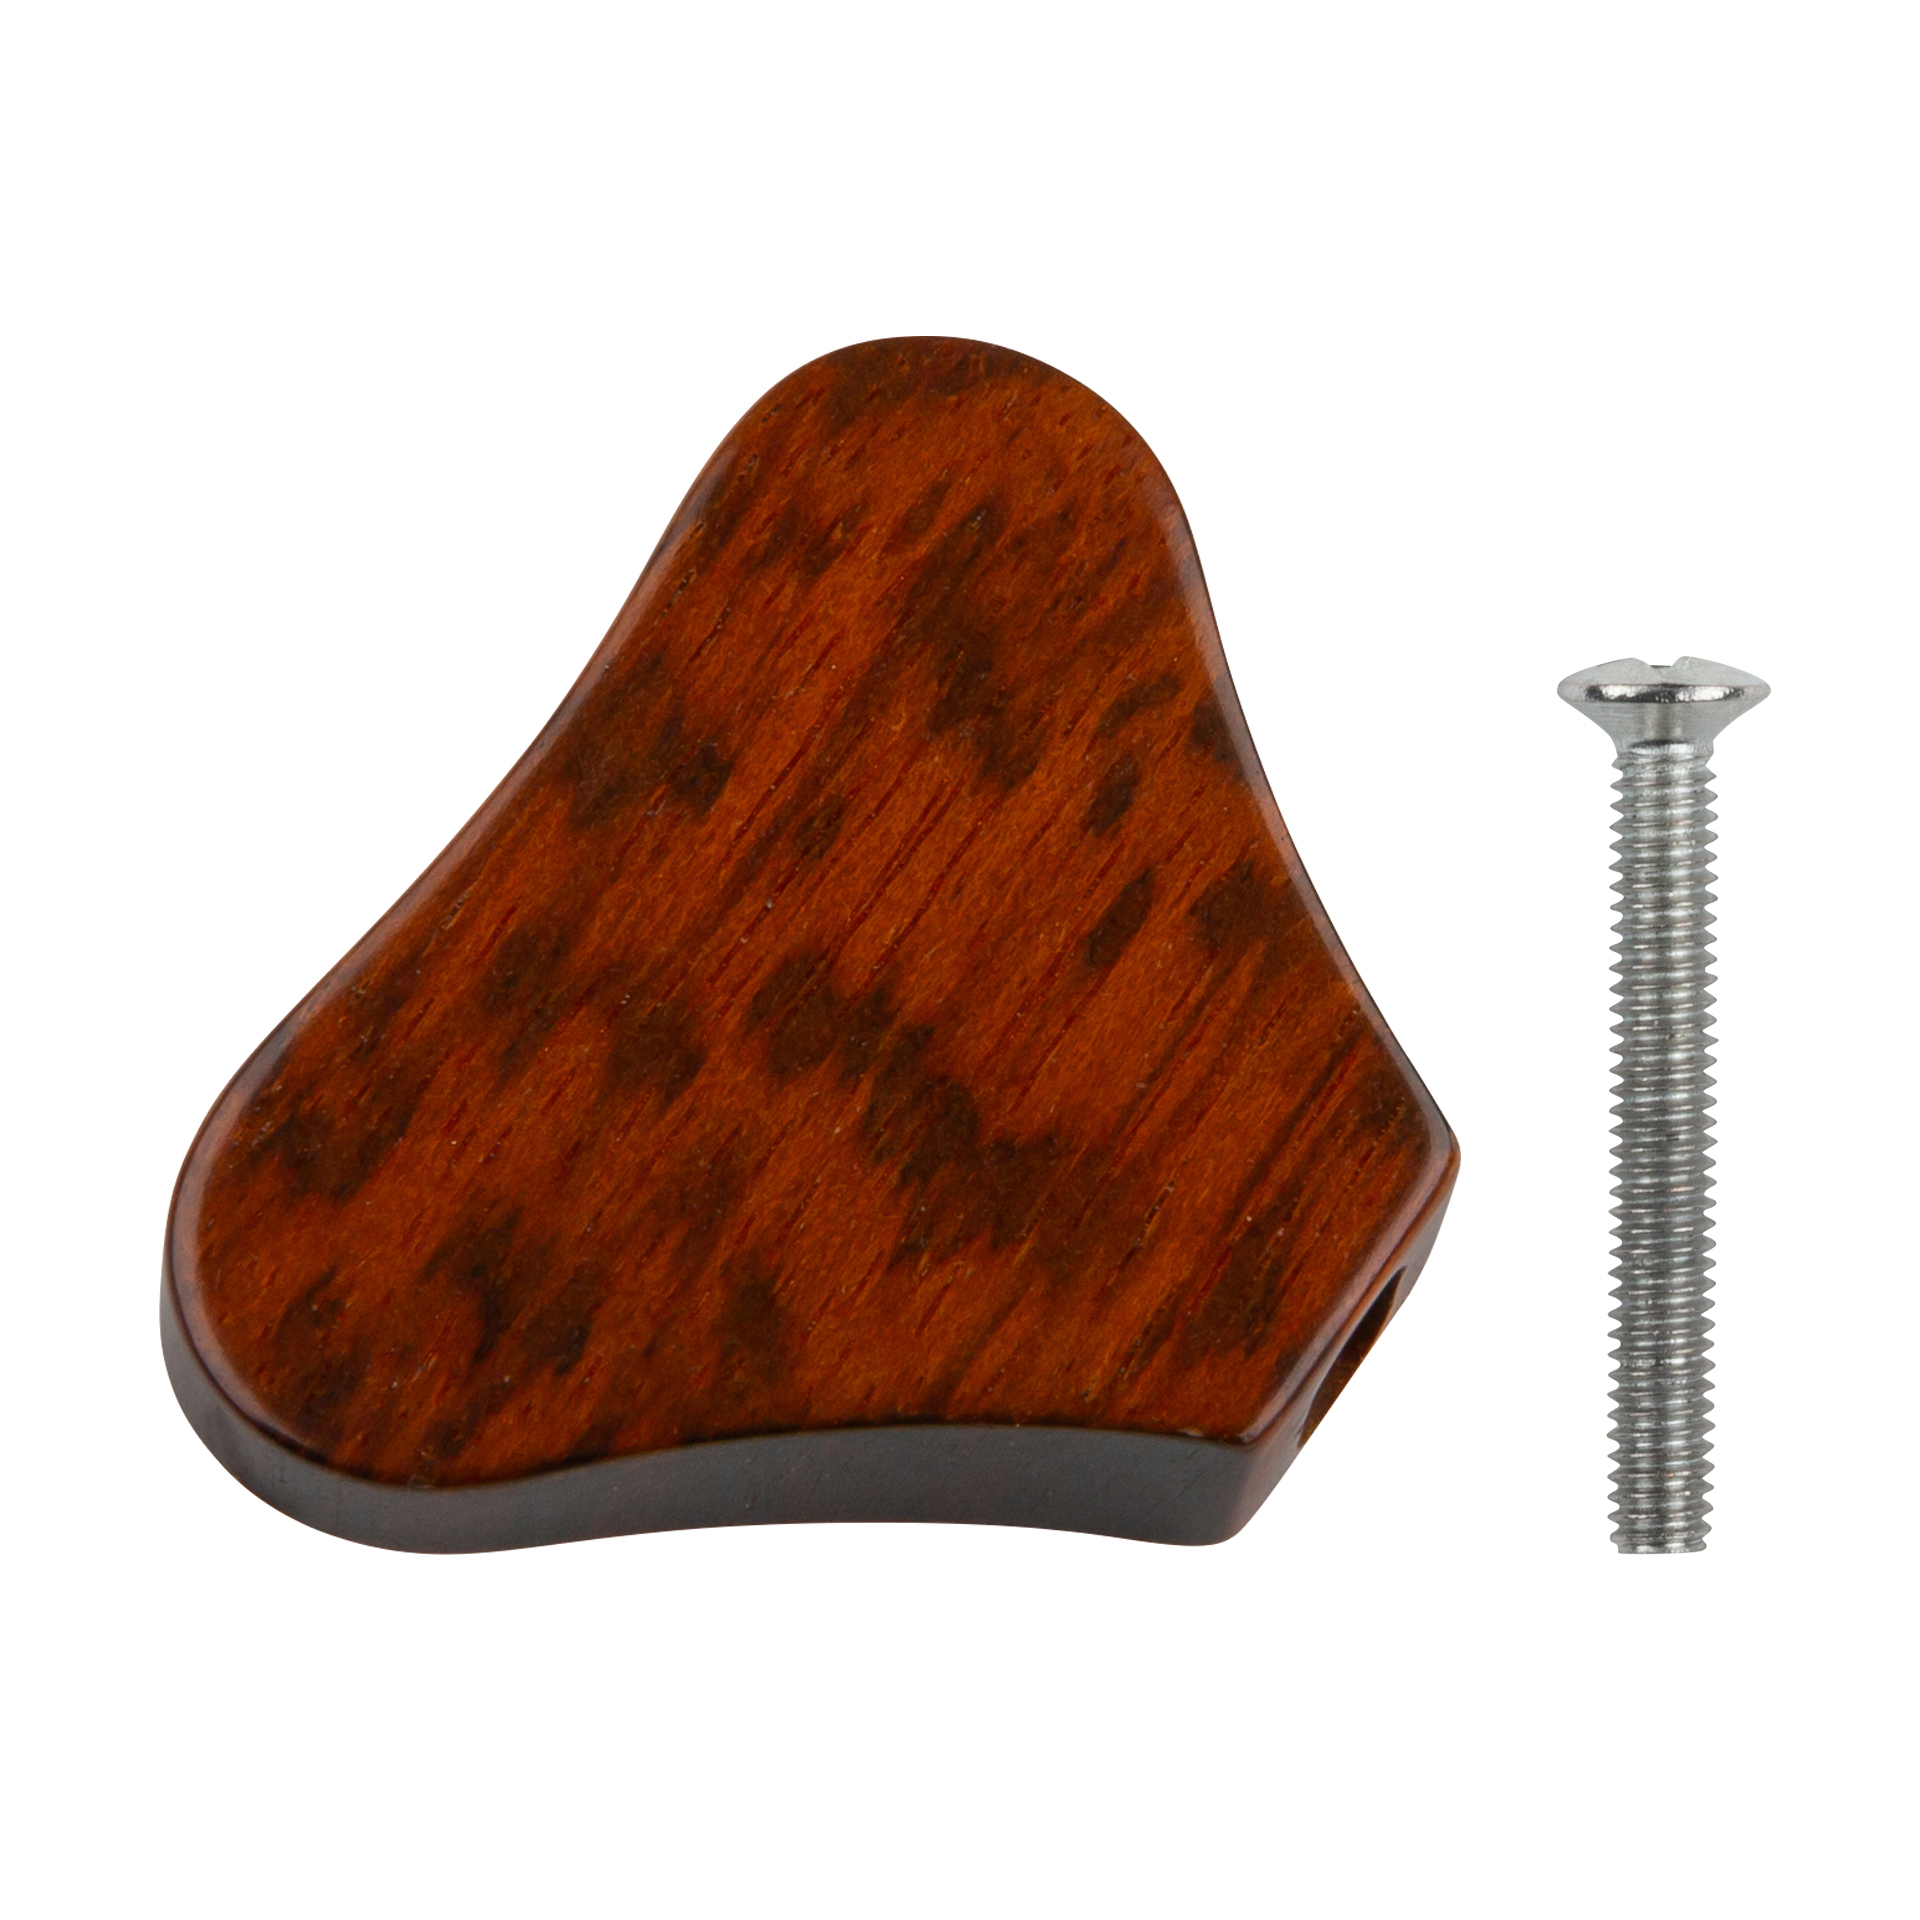 Warwick Parts - Wooden Peg for Warwick Machine Heads - Snakewood (with Chrome Screw)